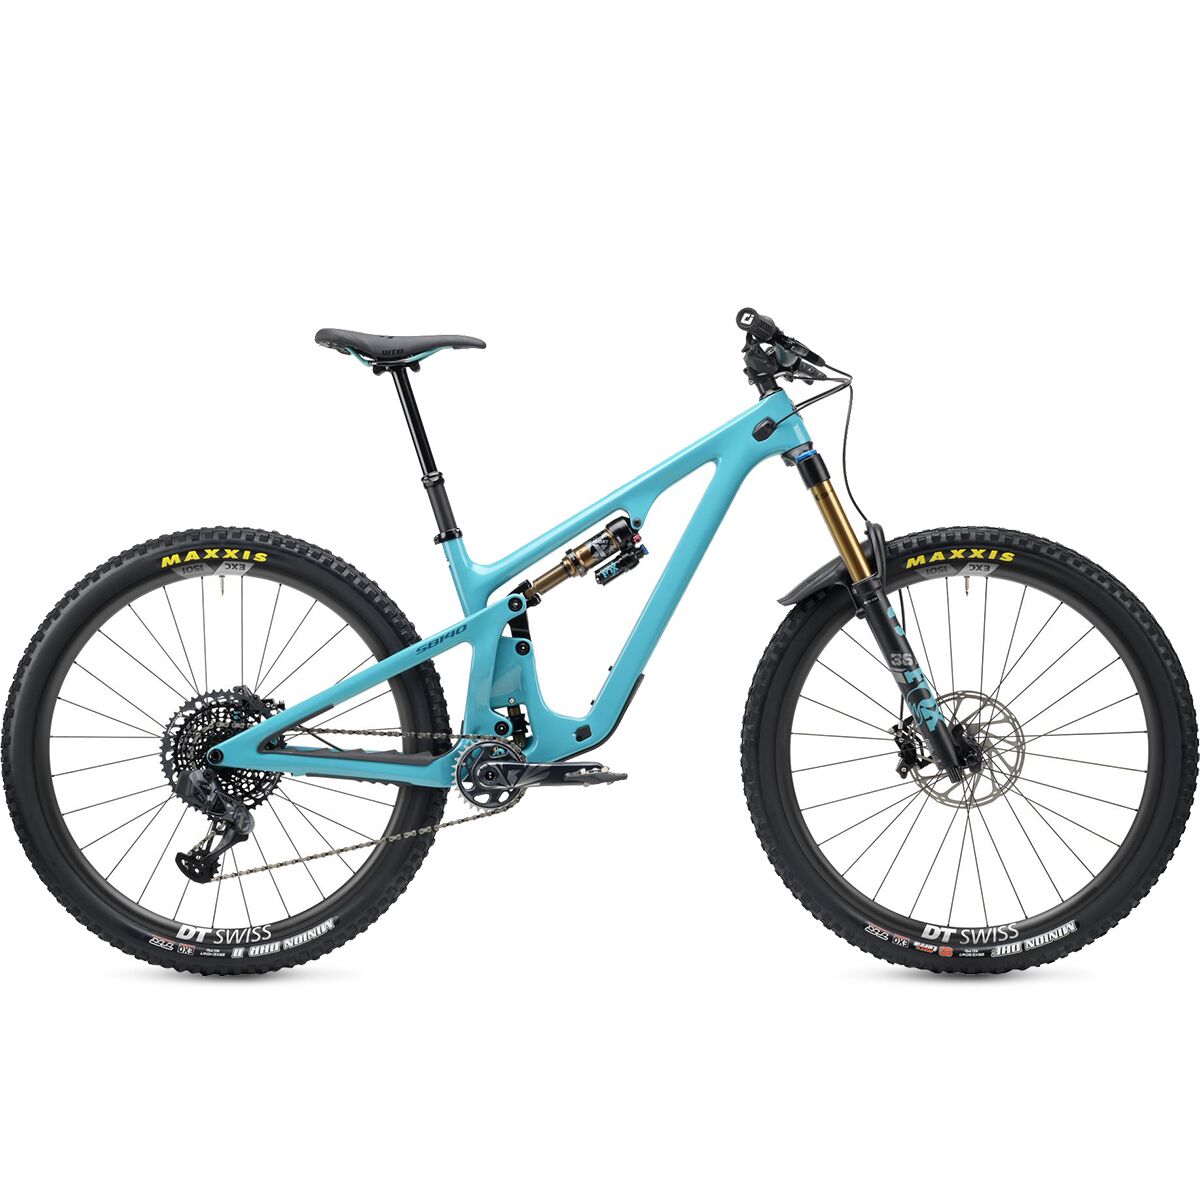 Yeti Cycles SB140 T3 TLR X01 Eagle AXS 29in Carbon Wheels Mountain Bike